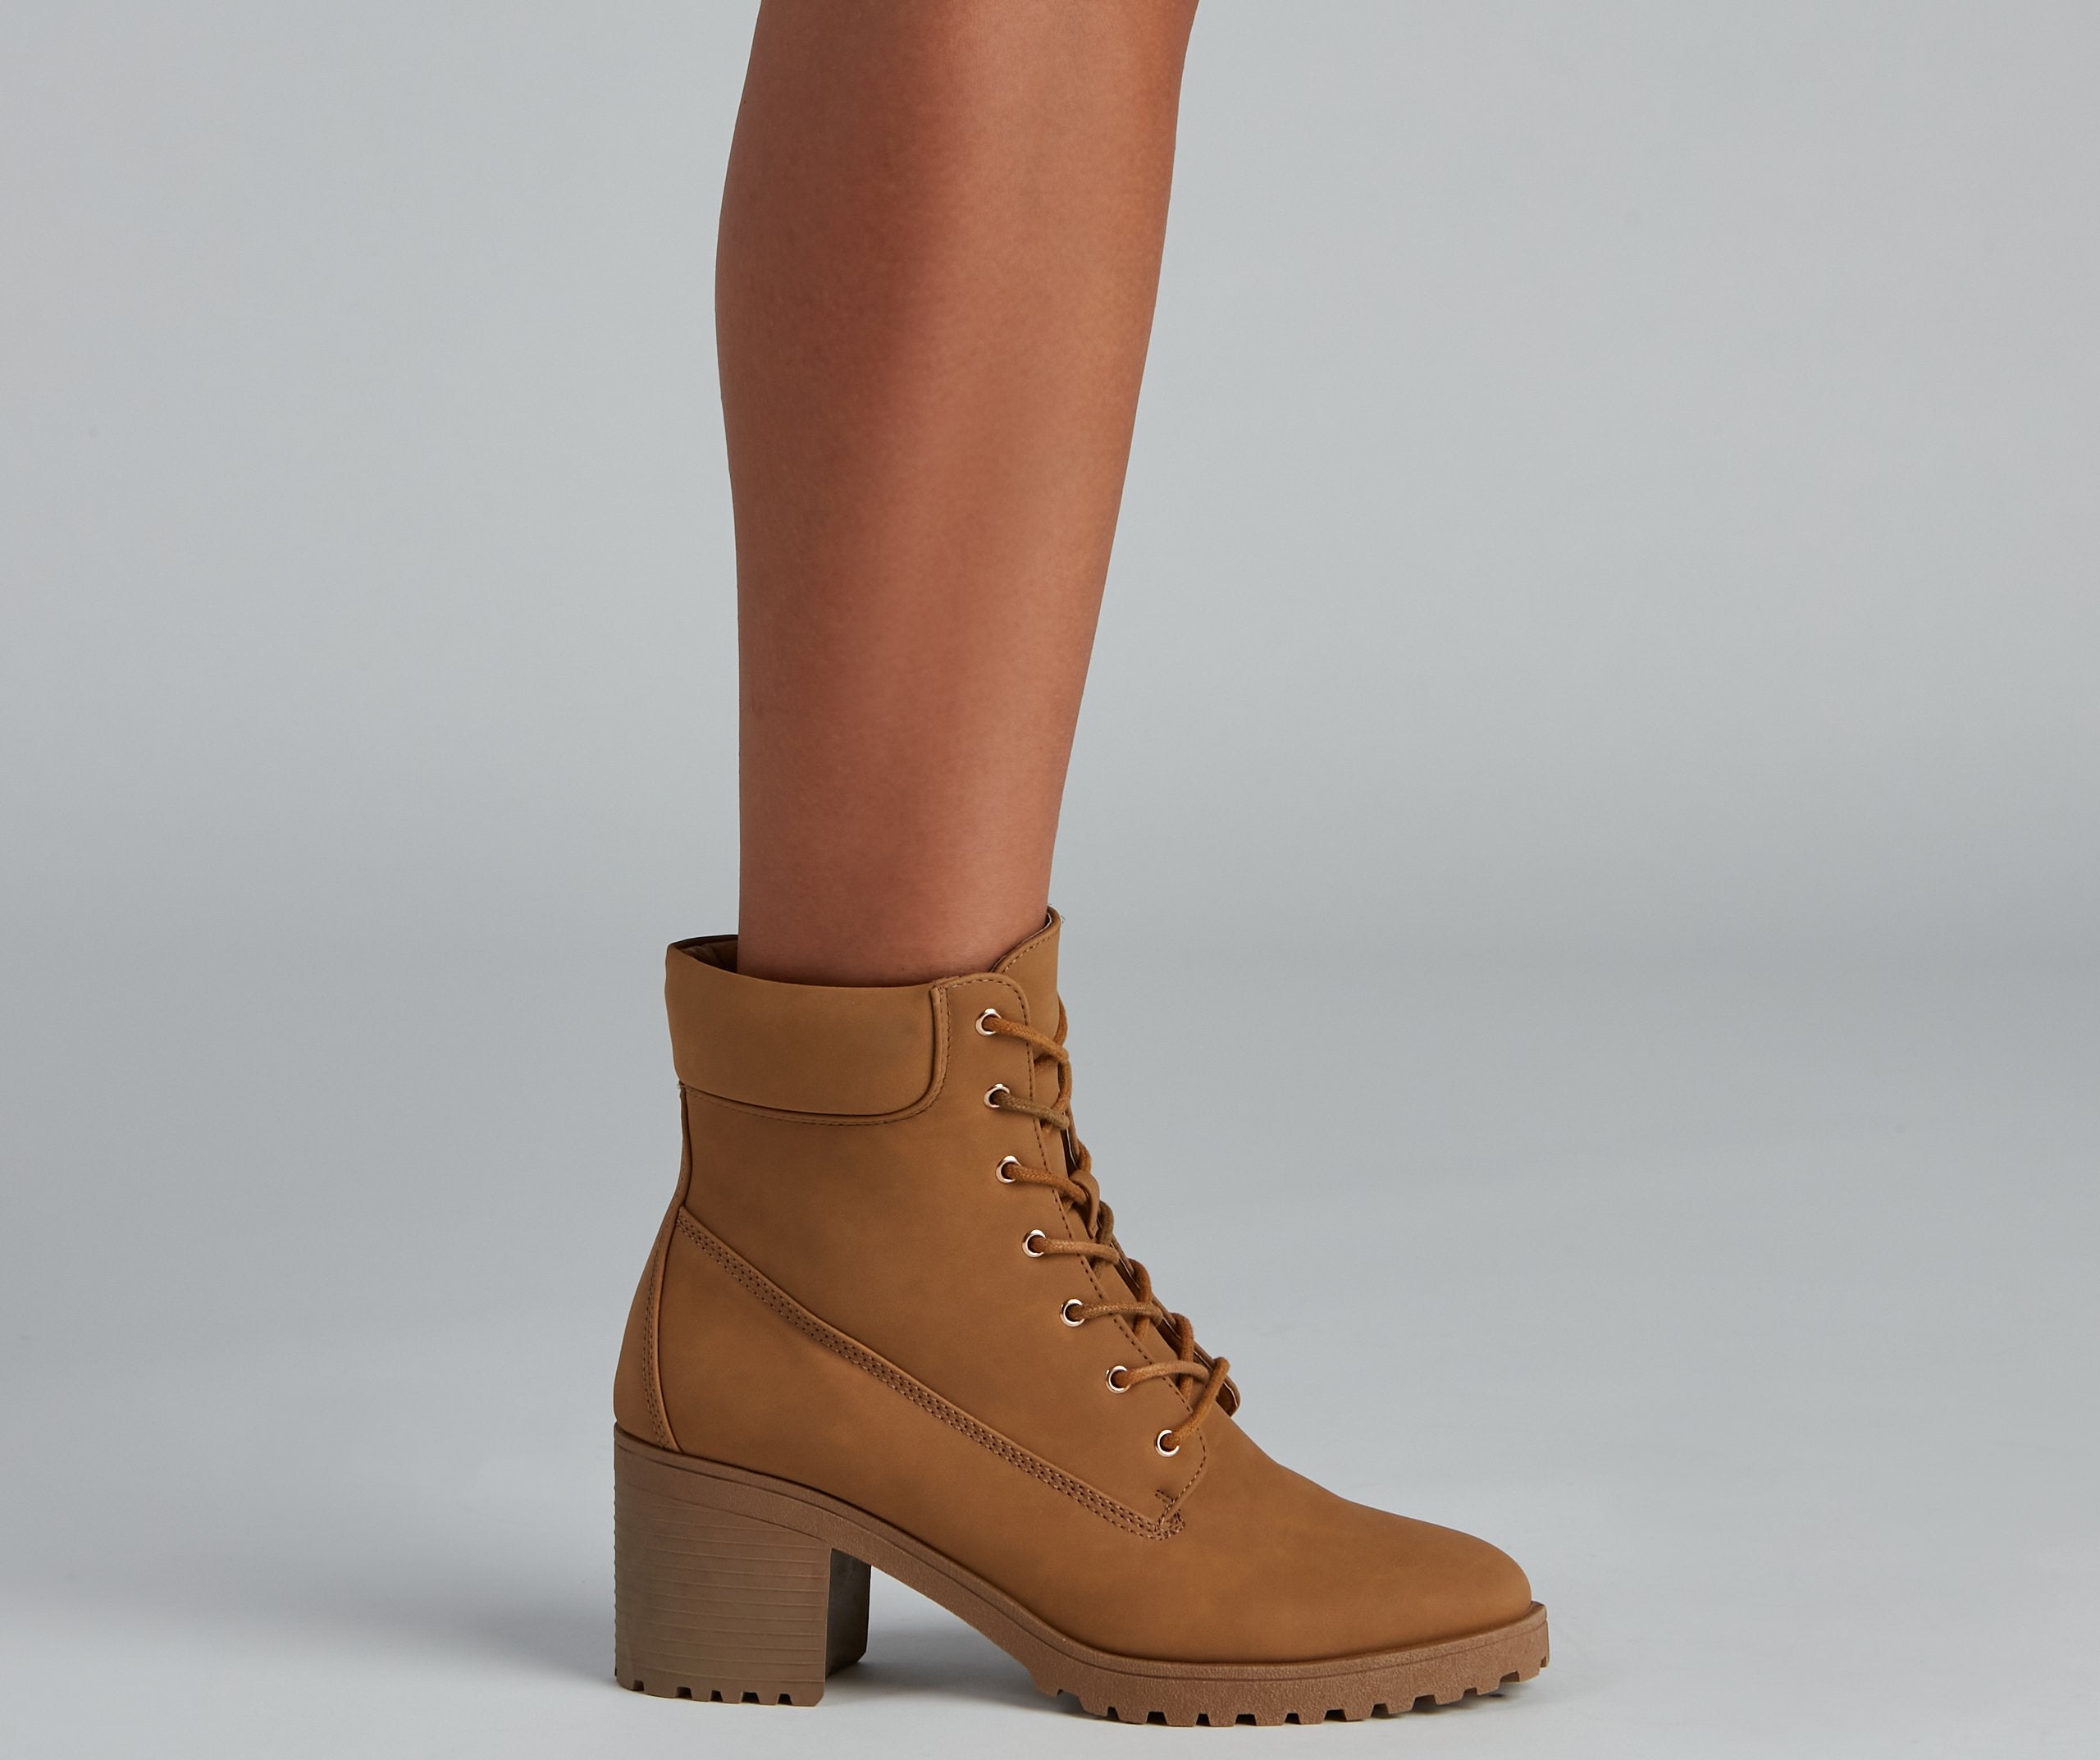 Trendy Moment Lace-Up Booties - Lady Occasions